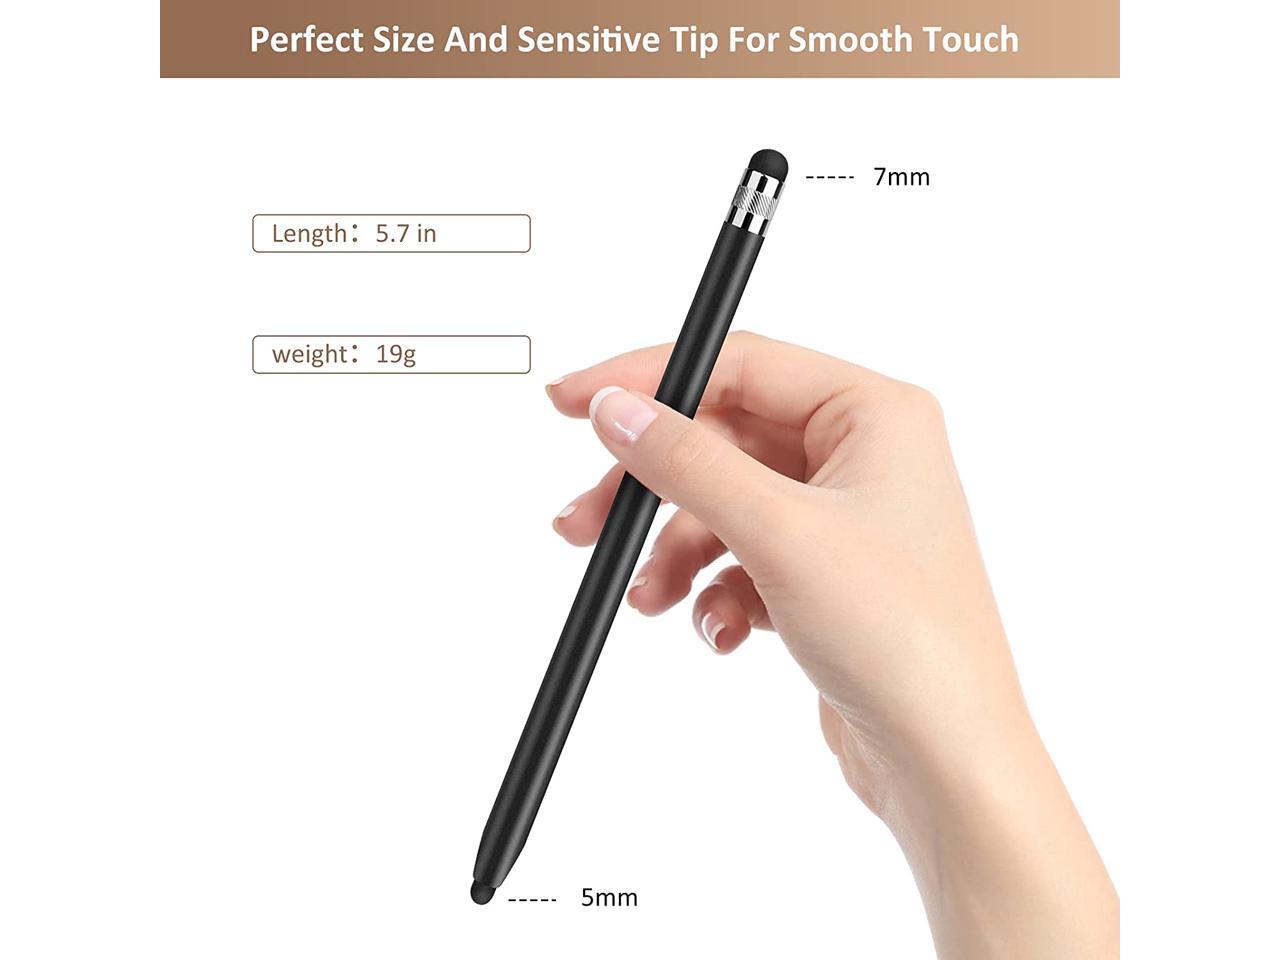 3 Pcs Stylushome Stylus Pens for Touch Screens Sensitivity Capacitive Stylus 2 in 1 Touch Screen Pen with 6 Extra Replaceable Tips for iPad iPhone Tablets Samsung Galaxy All Universal Touch Devices 